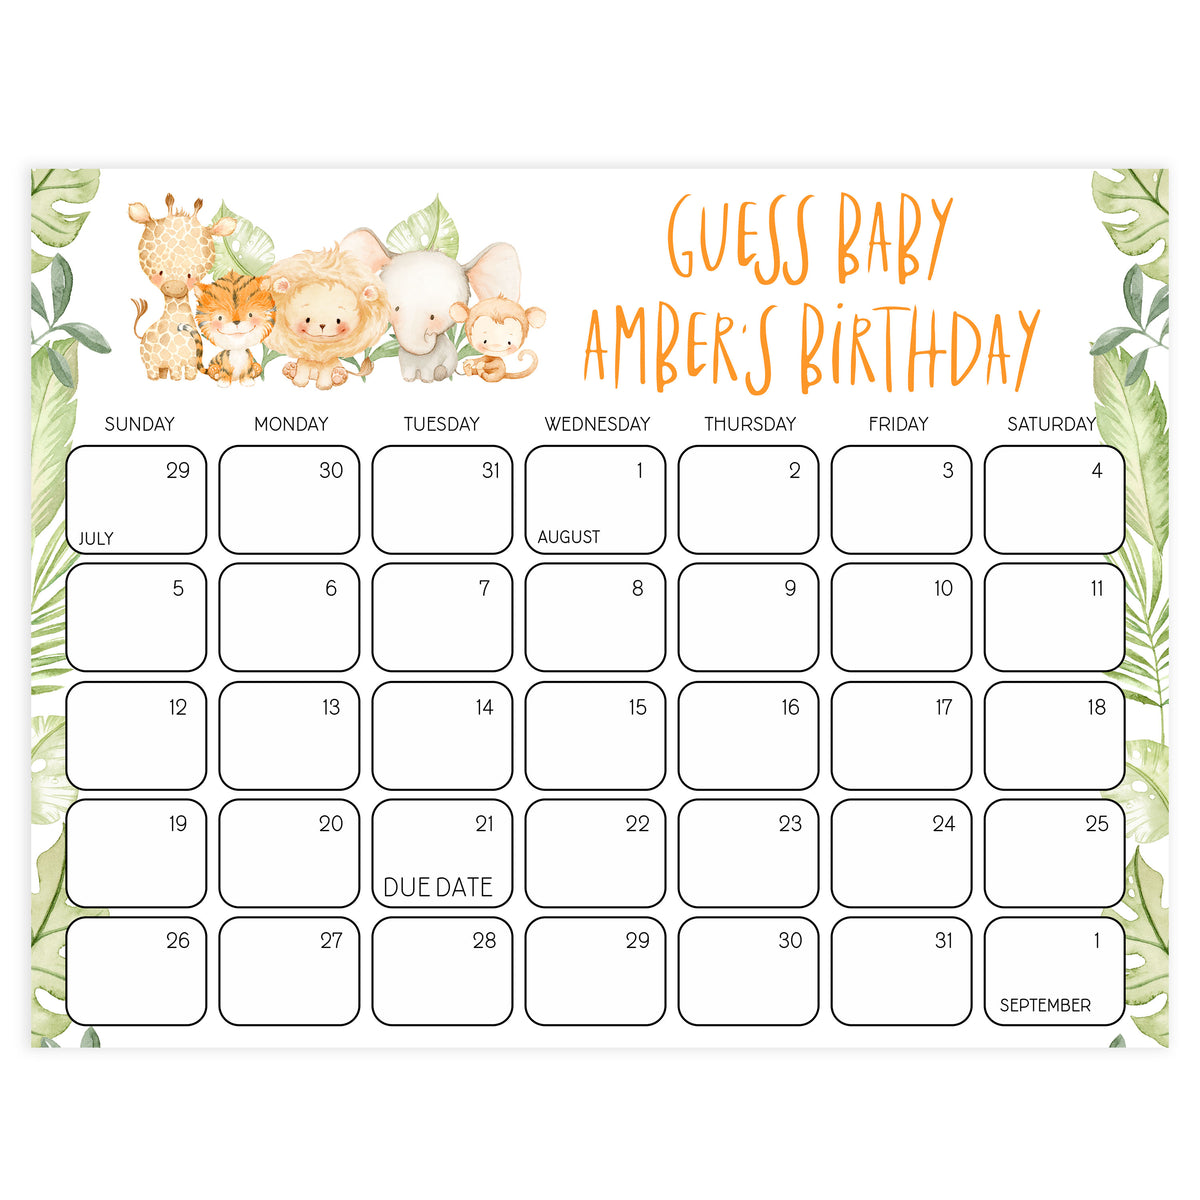 guess the baby birthday game, Printable baby shower games, safari animals baby games, baby shower games, fun baby shower ideas, top baby shower ideas, safari animals baby shower, baby shower games, fun baby shower ideas